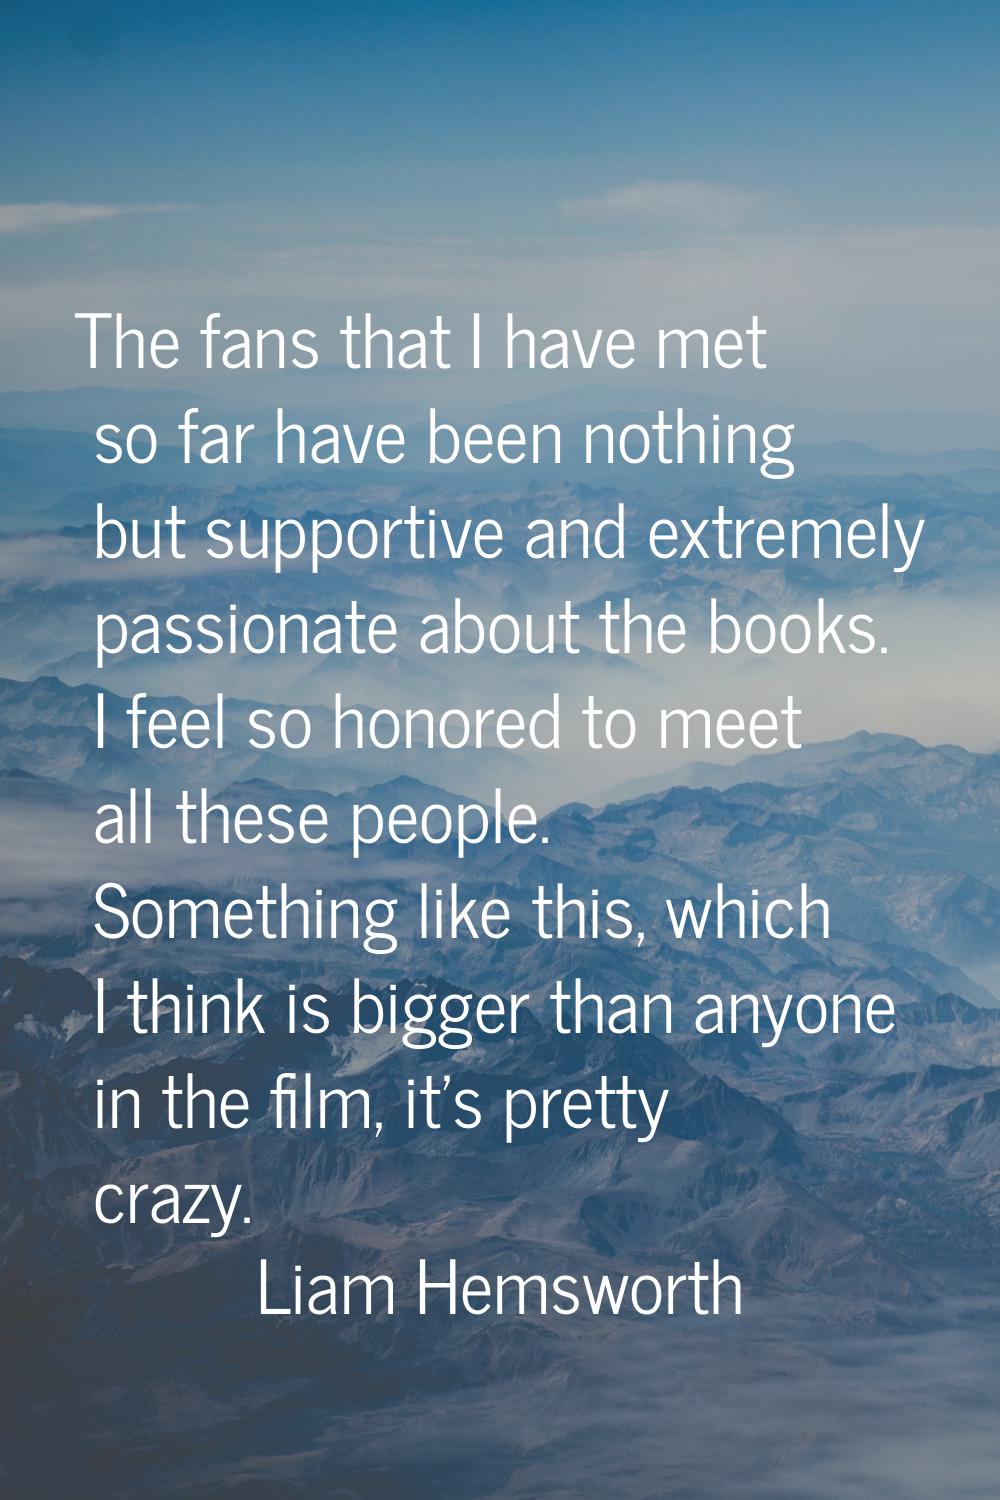 The fans that I have met so far have been nothing but supportive and extremely passionate about the